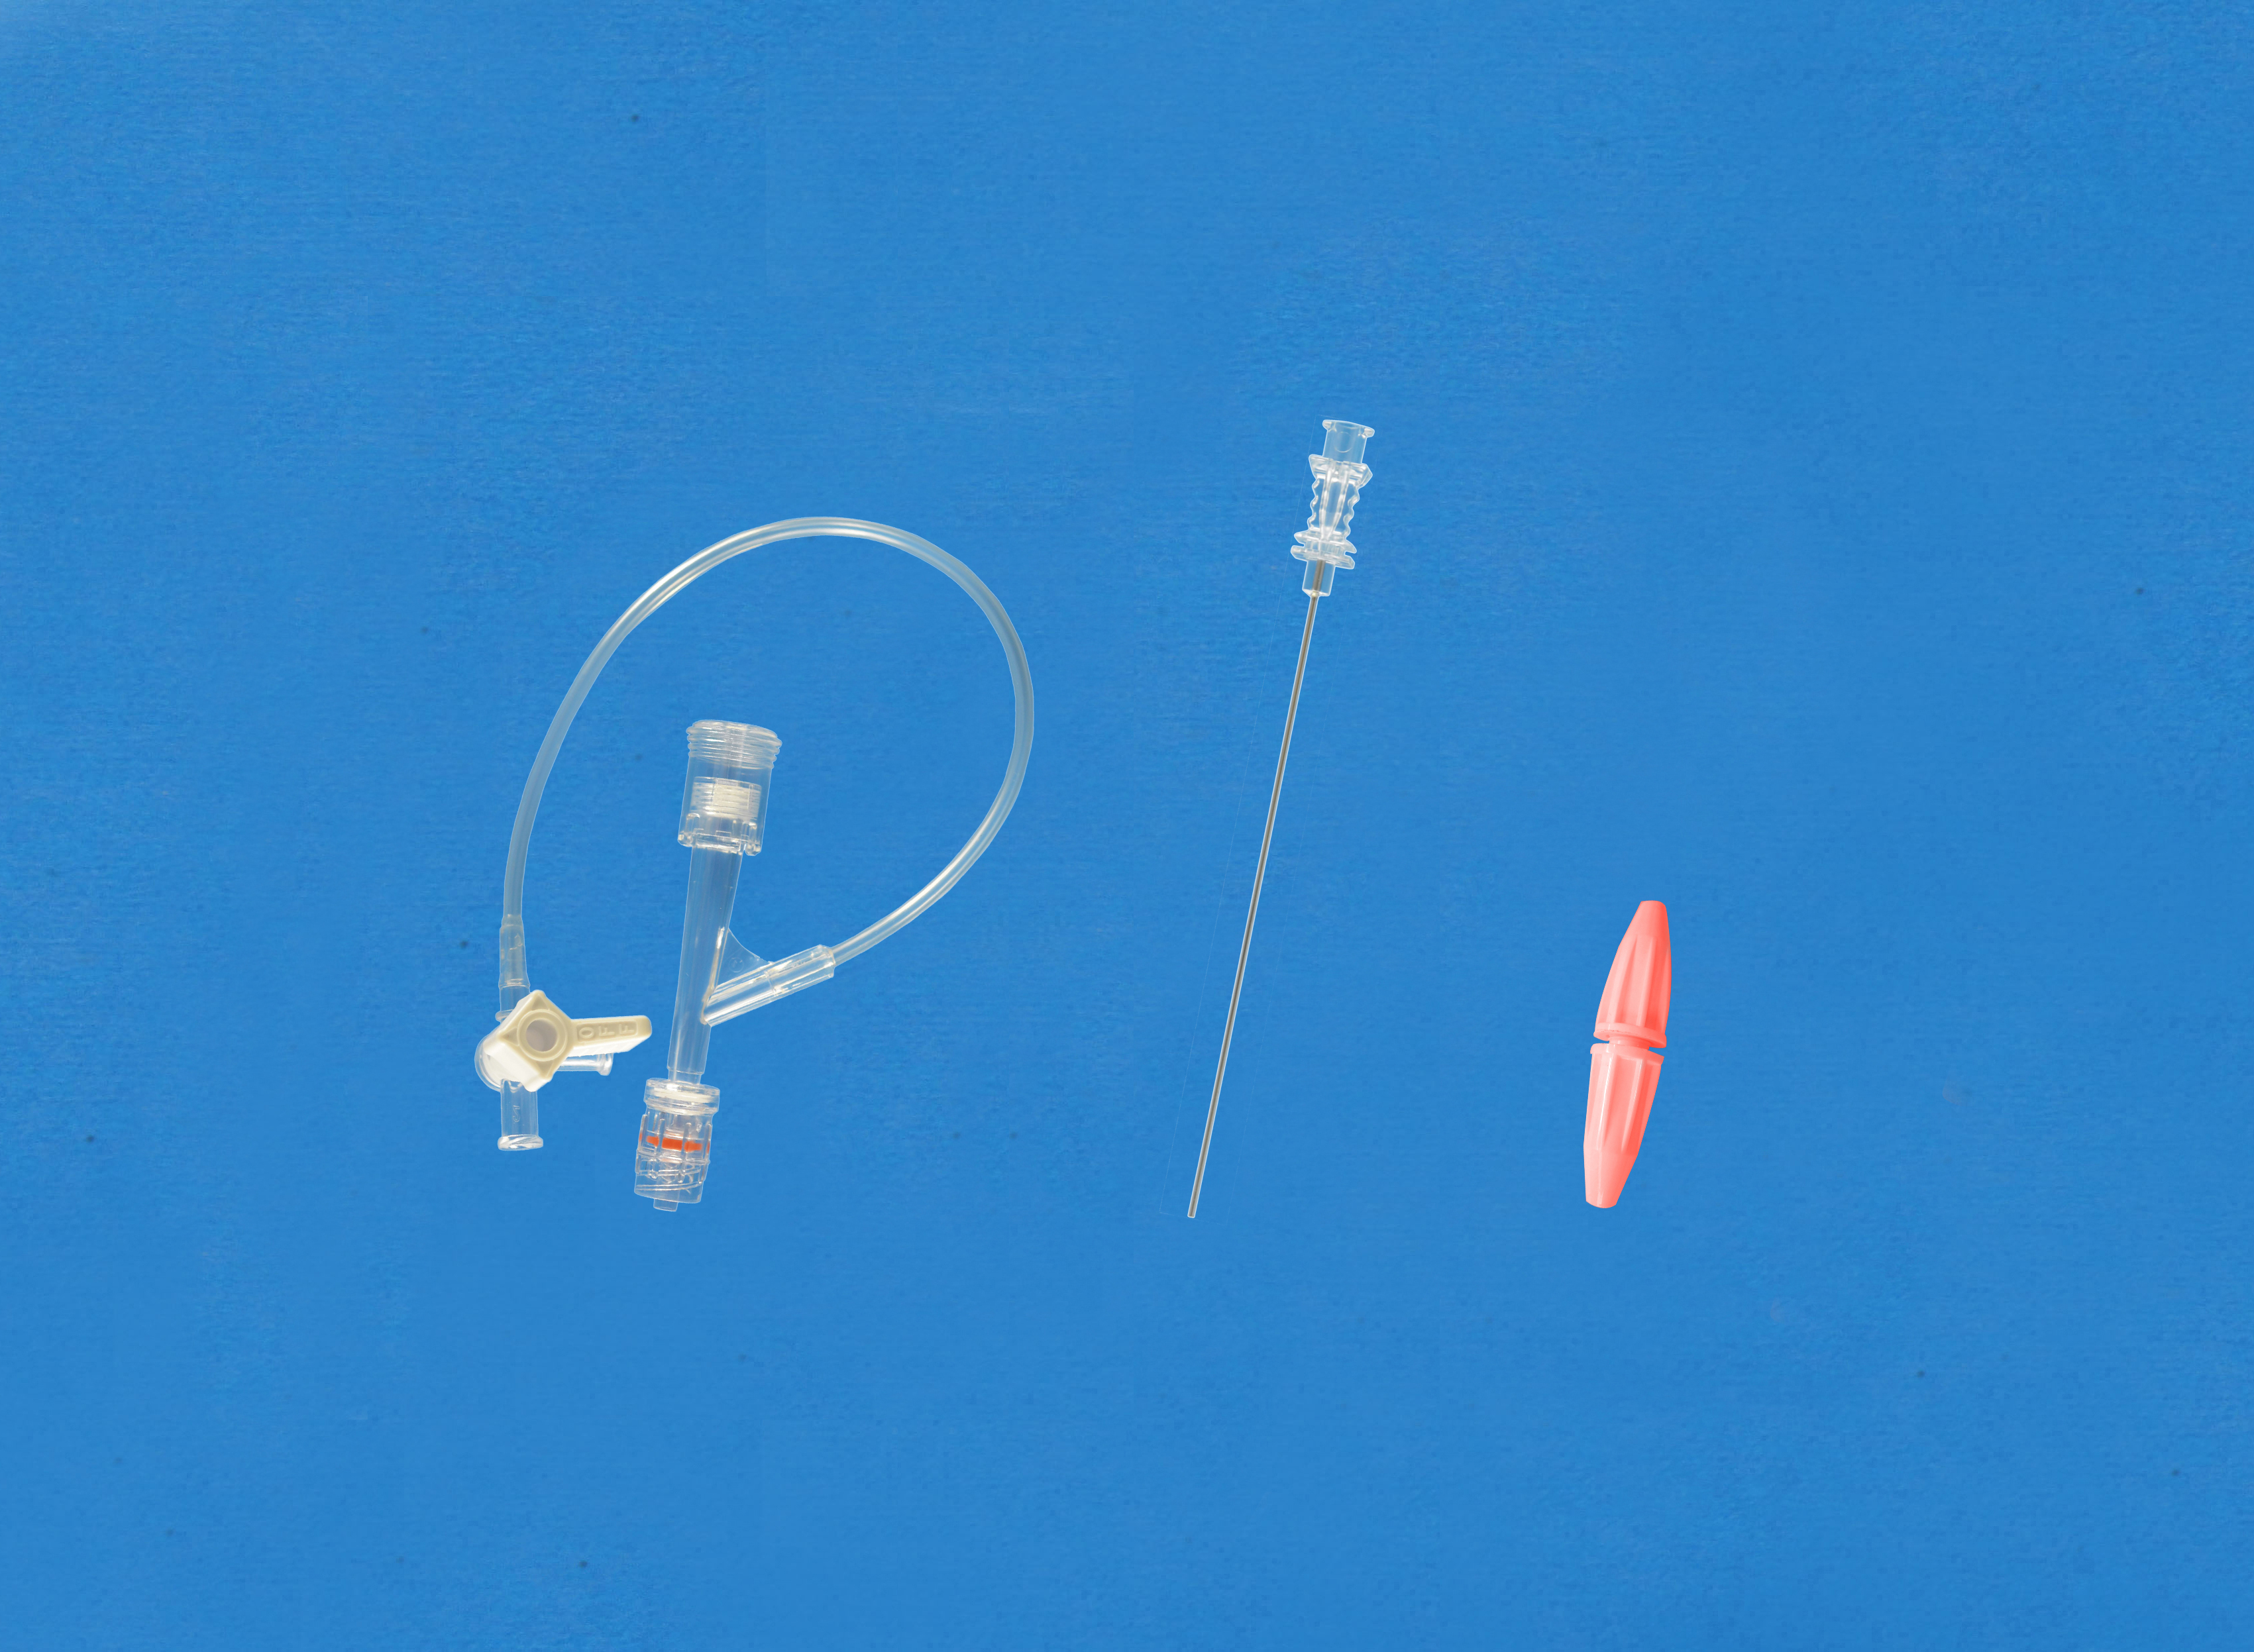 Haemostatic valves, Push-pull, Sideon Tubing and Stopcock, Insertion Tool with Large Hub, Red/Plastic Torquer